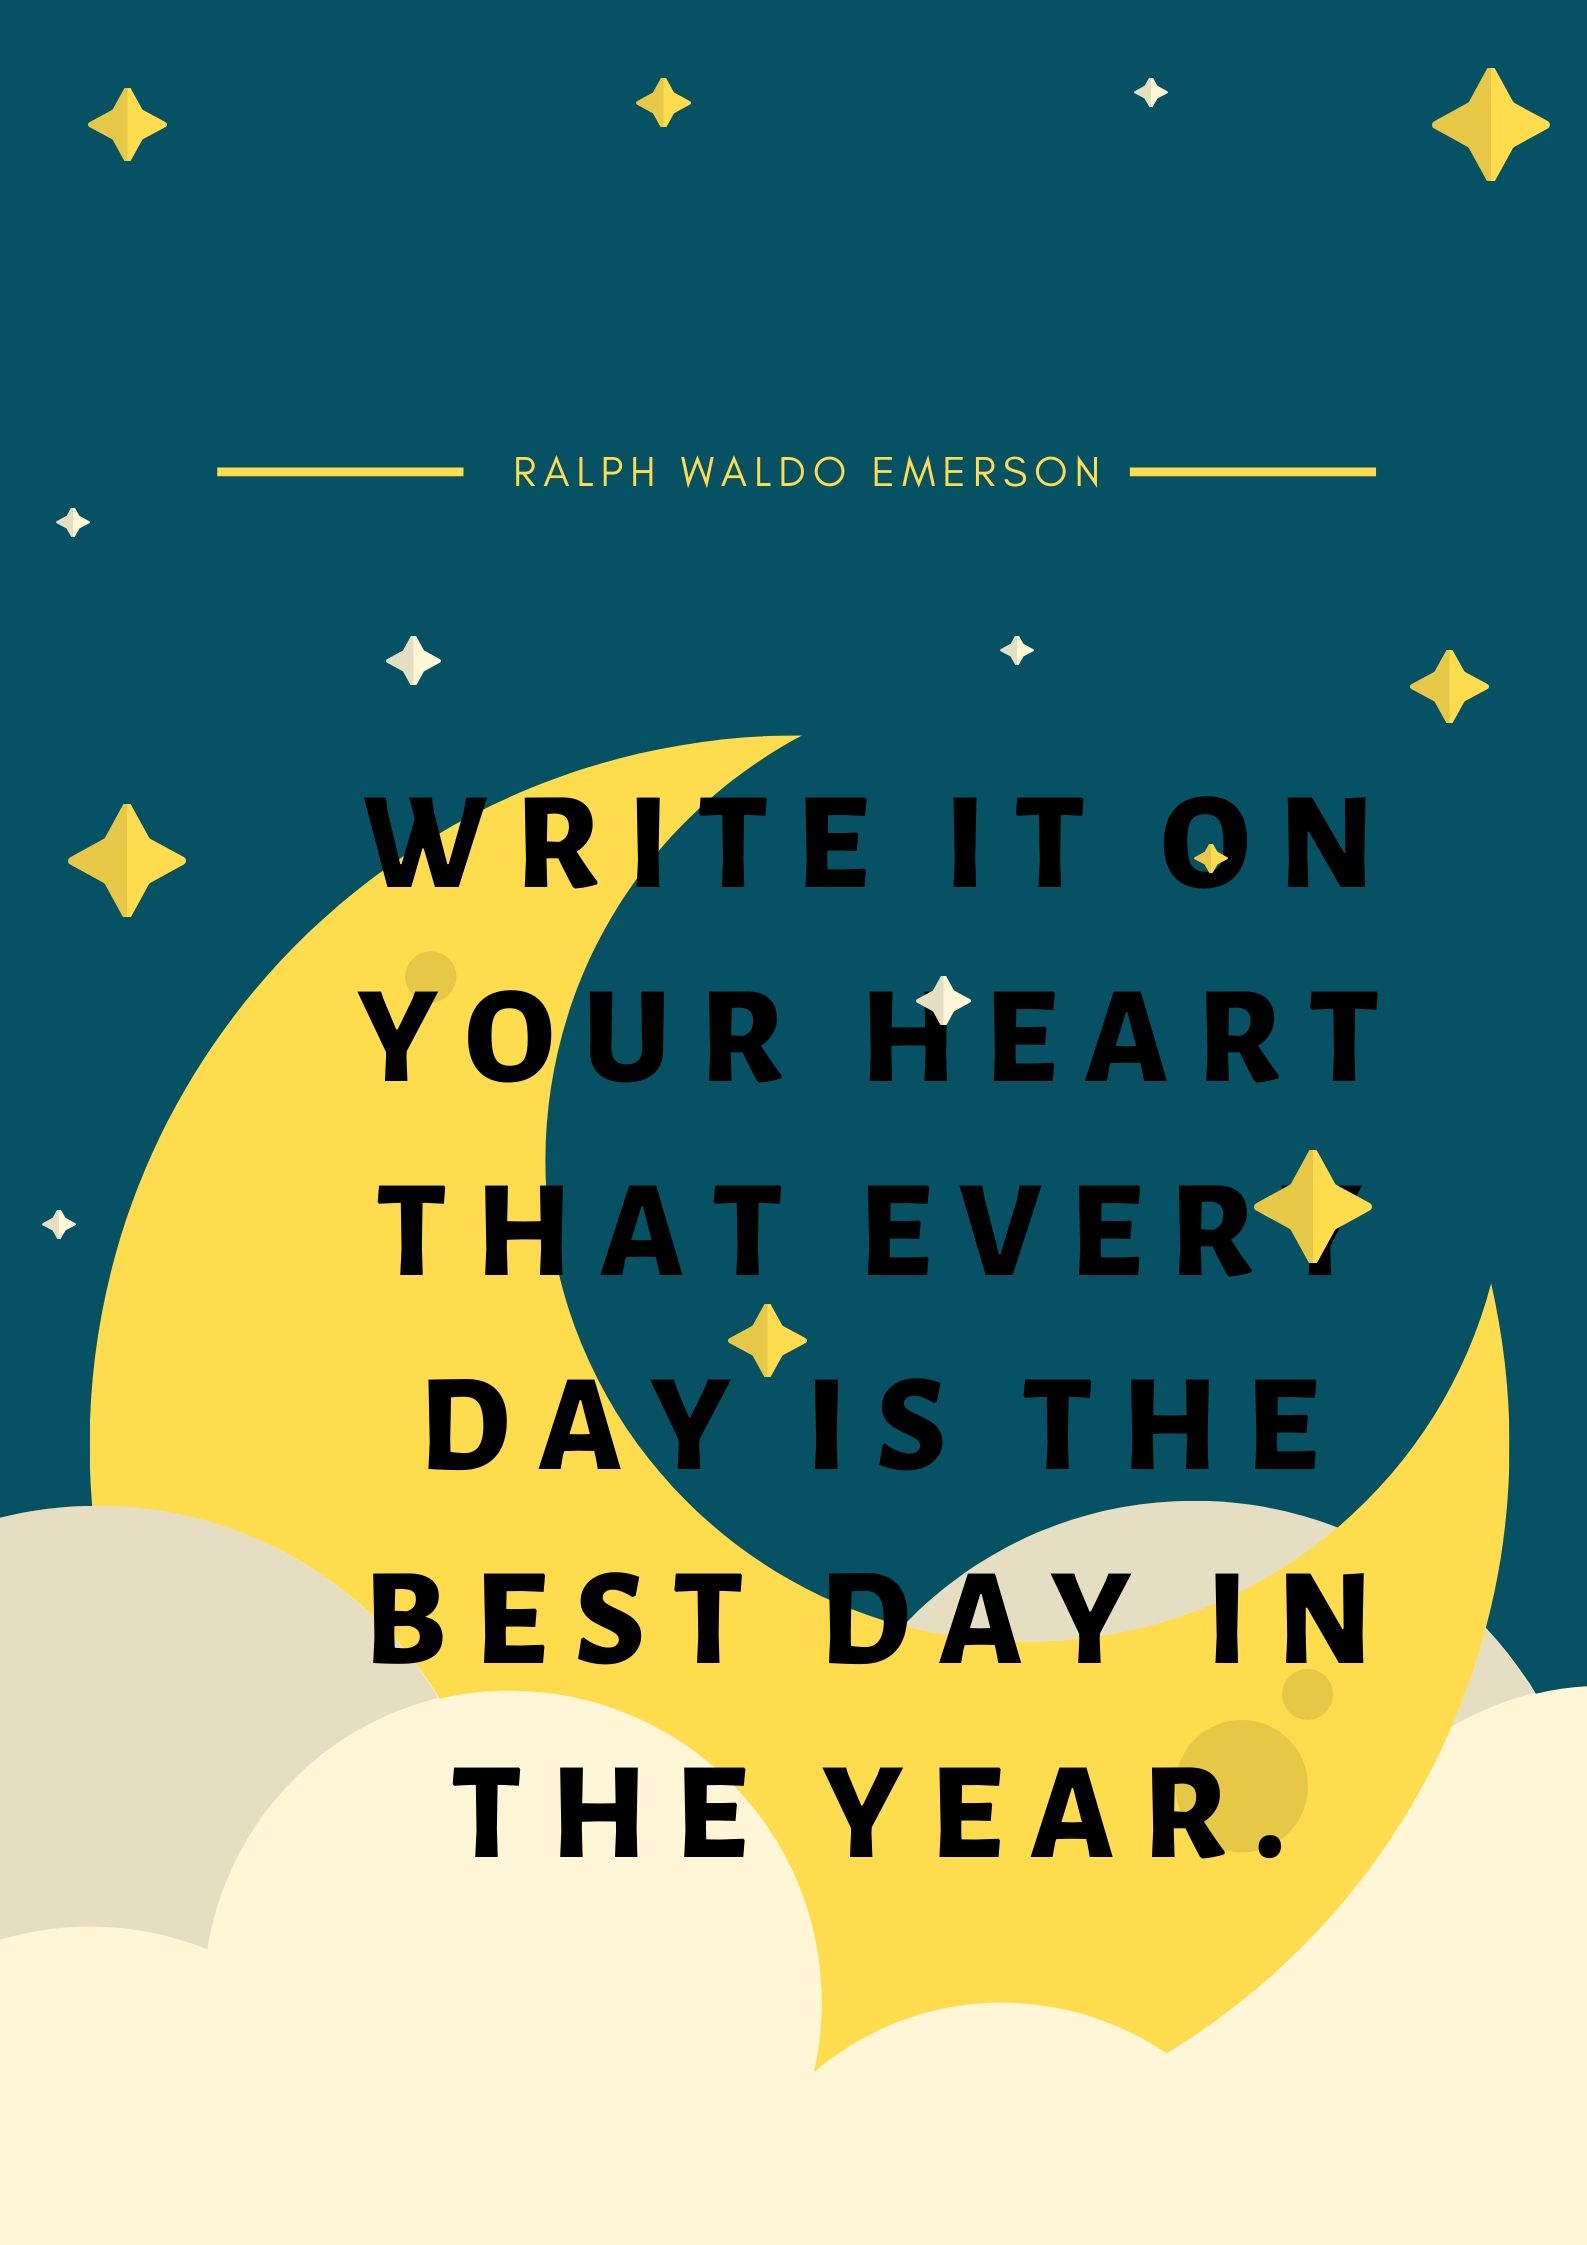 Write it on your heart that every day is the best day in the year. (2)